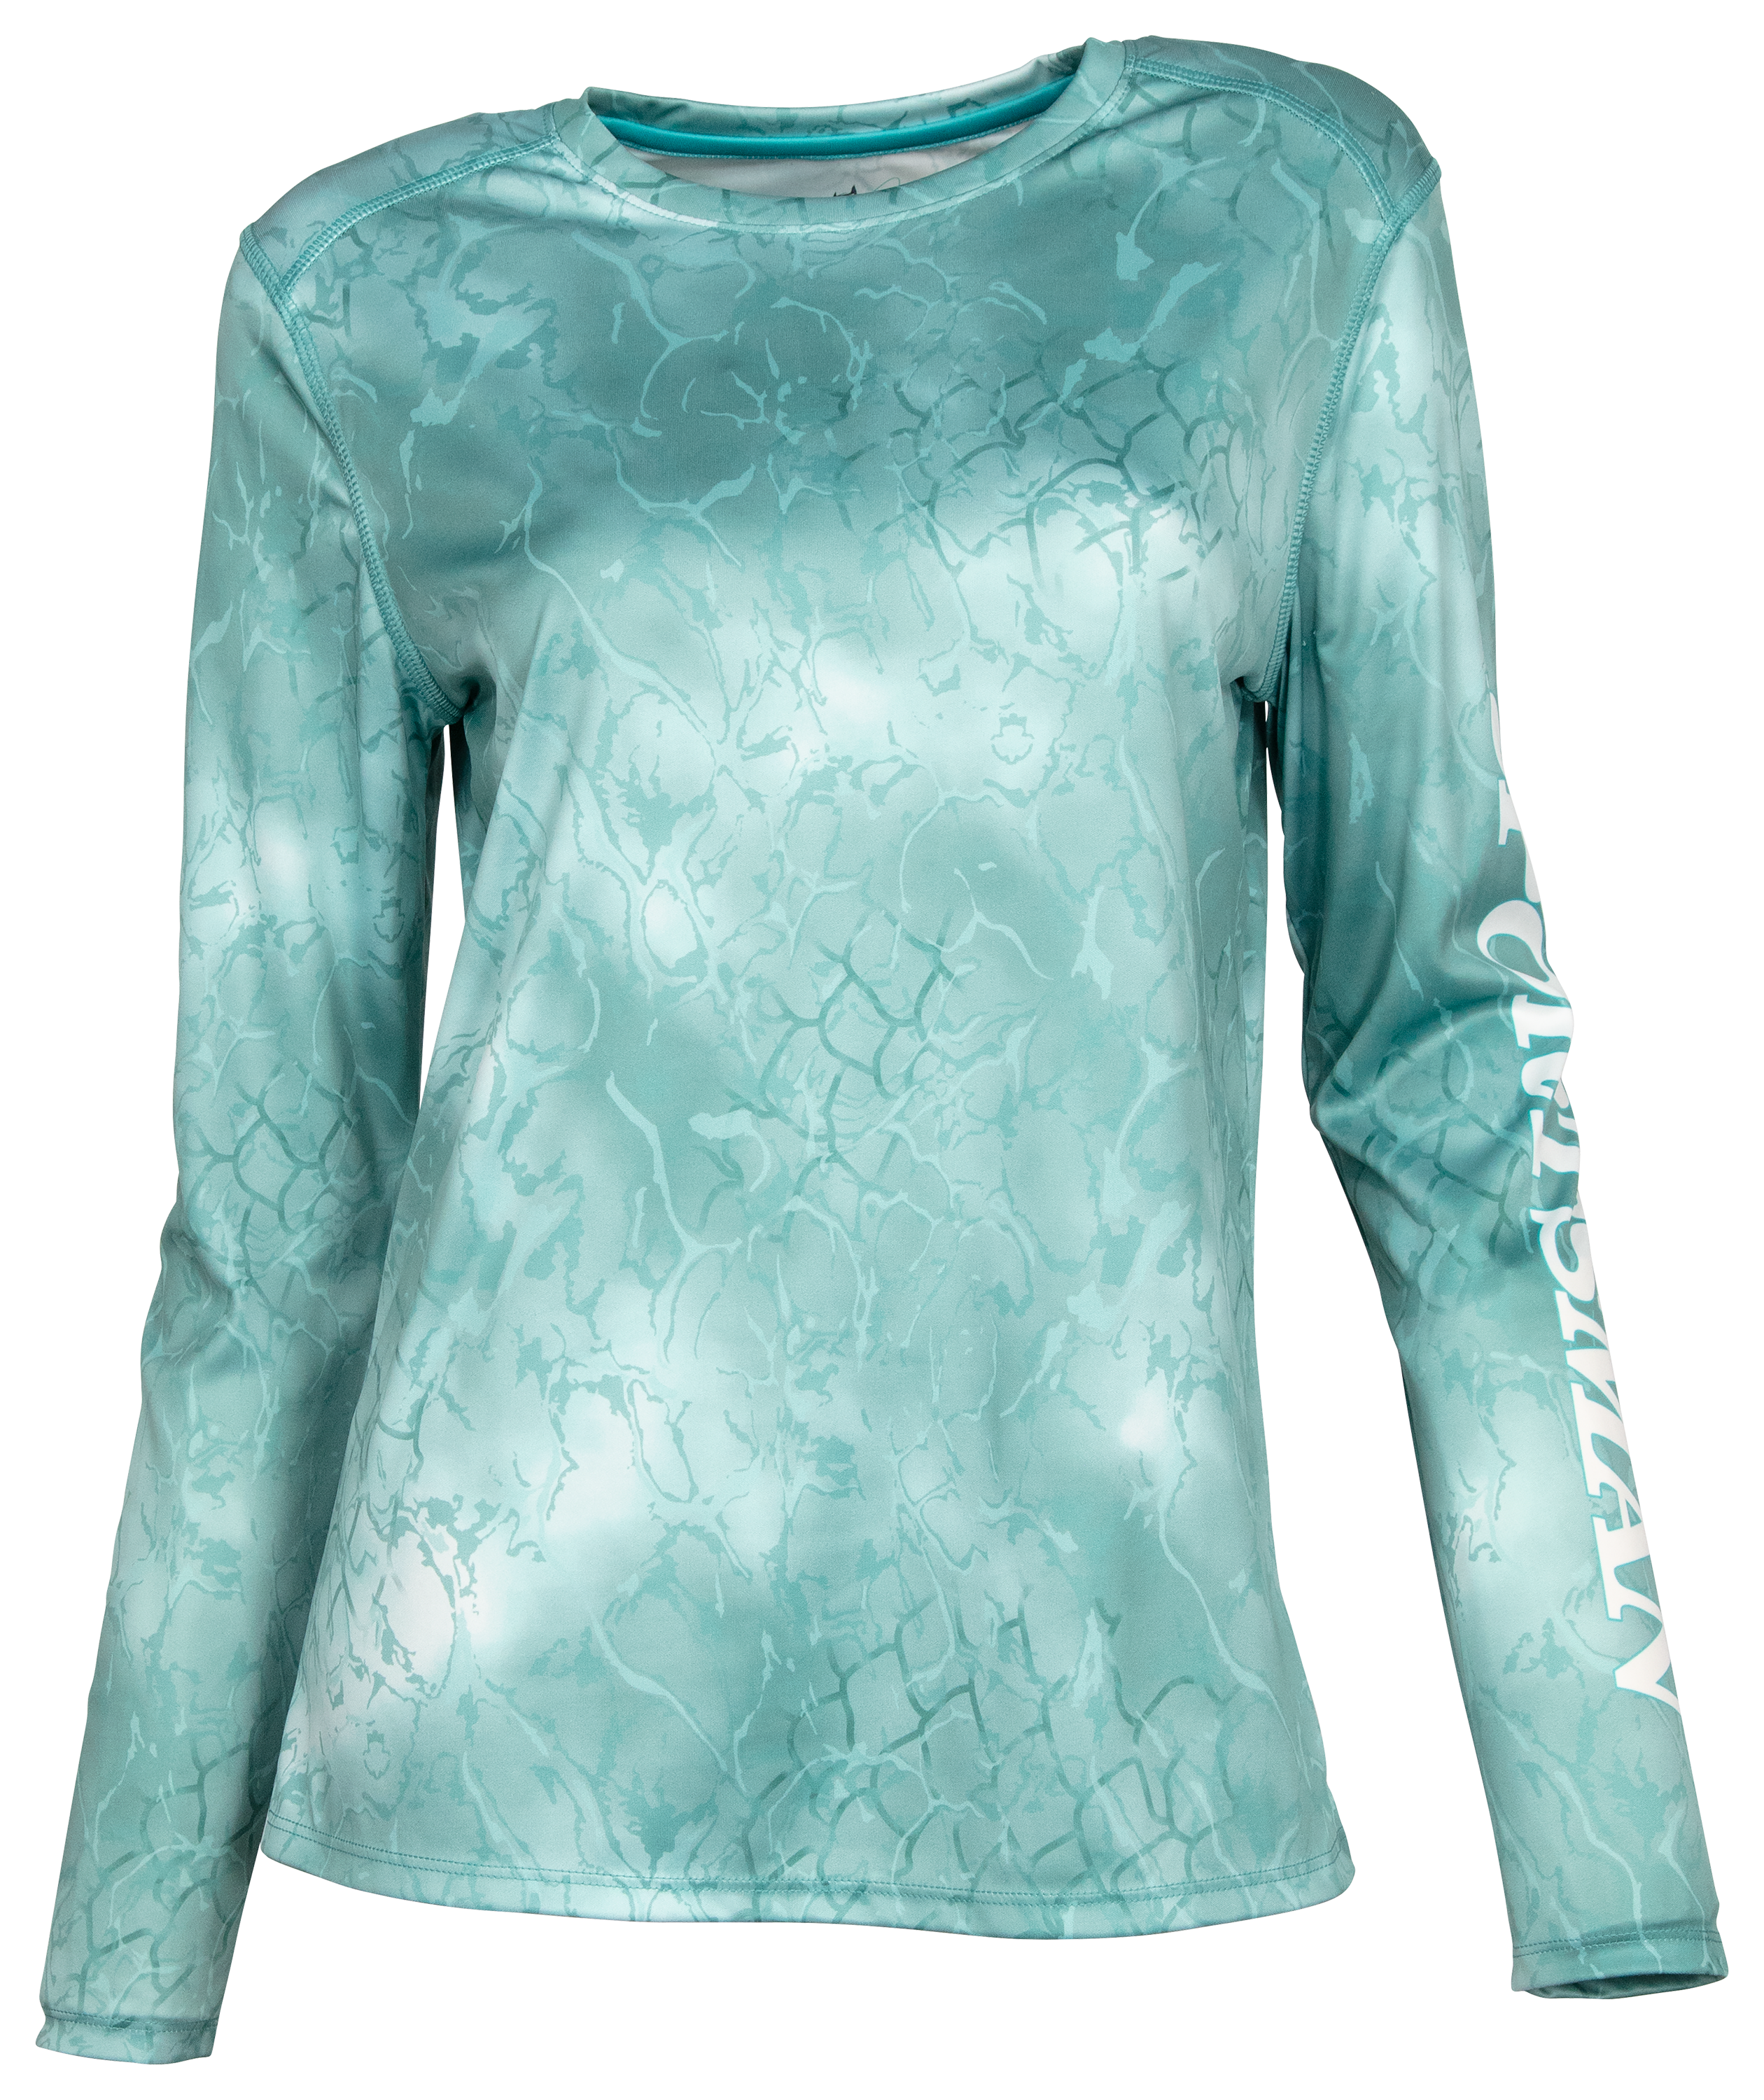 World Wide Sportsman Angler Long-Sleeve Crew-Neck Shirt for Ladies - Navagio Blue - 2XL